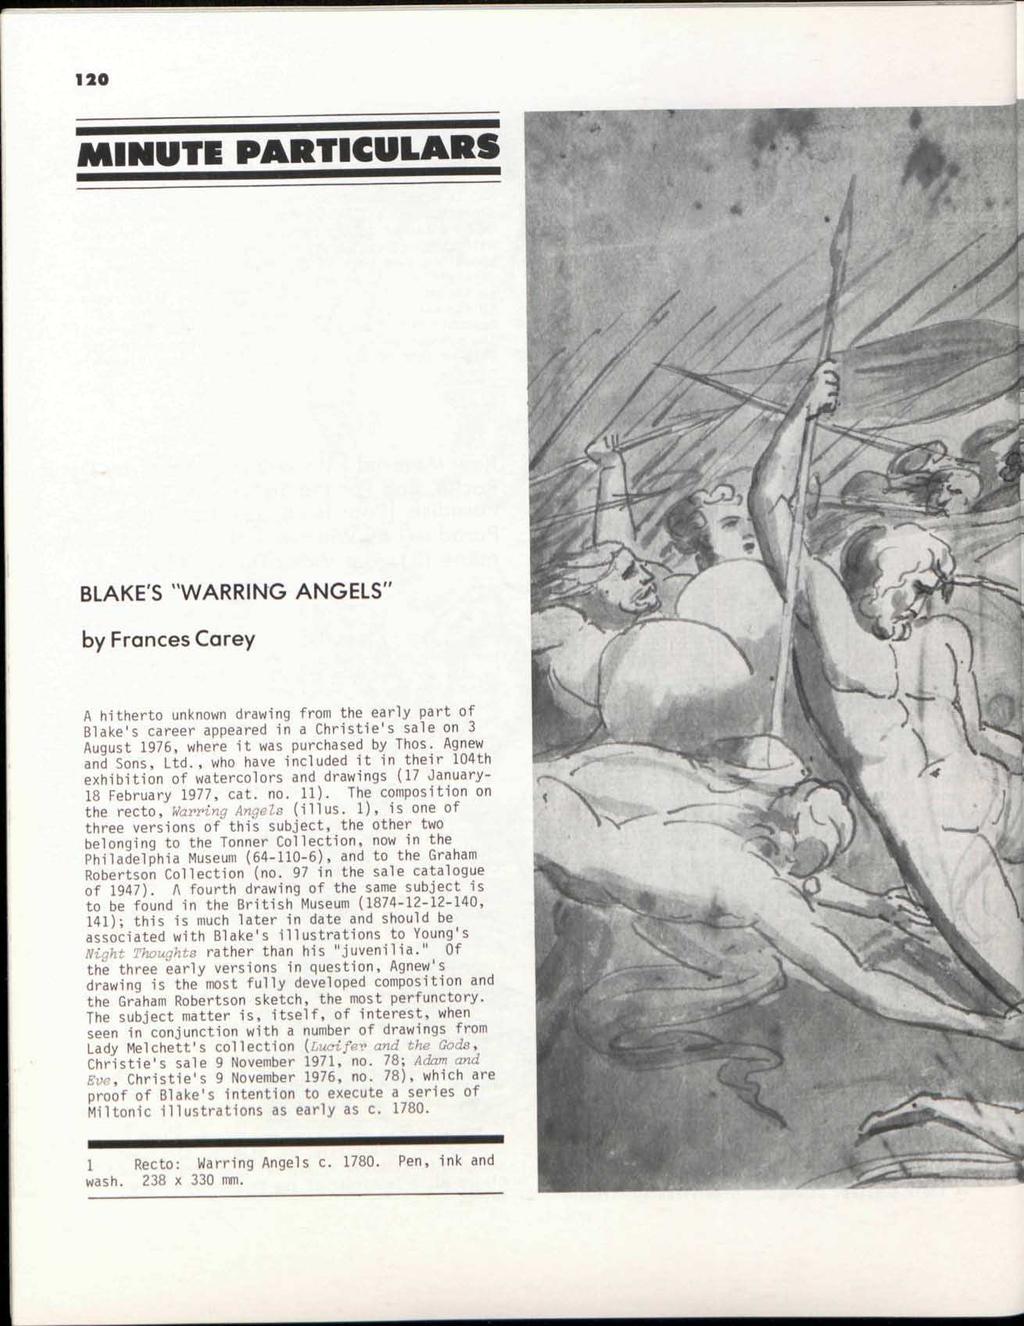 120 MINUTE PARTICULARS BLAKE'S "WARRING ANGELS" by Frances Carey A hitherto unknown drawing from the early part of Blake's career appeared in a Christie's sale on 3 August 1976, where it was